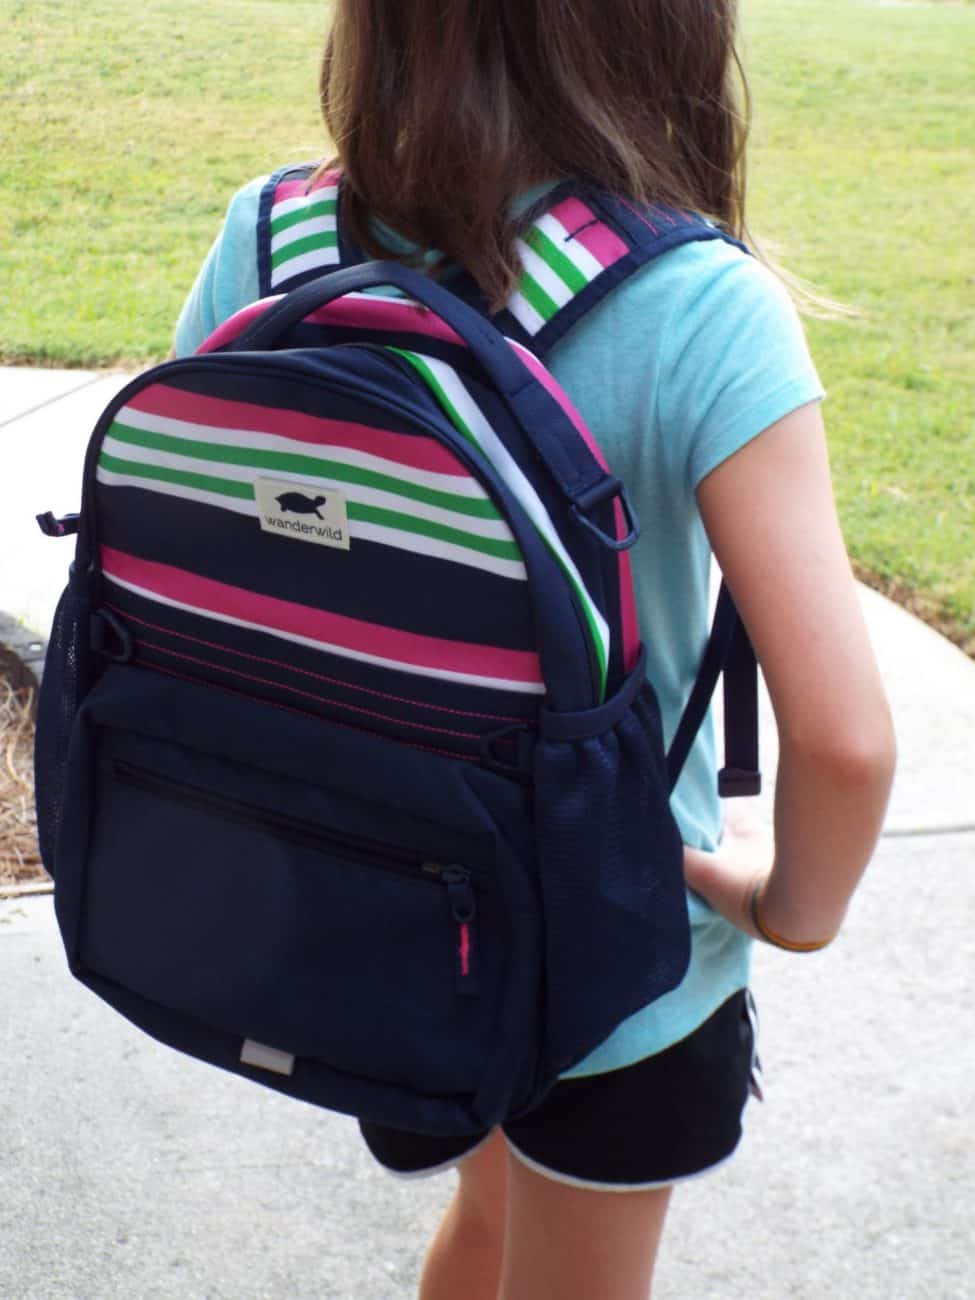 Everything You Didn’t Know You Needed For Your Back To School List This Year